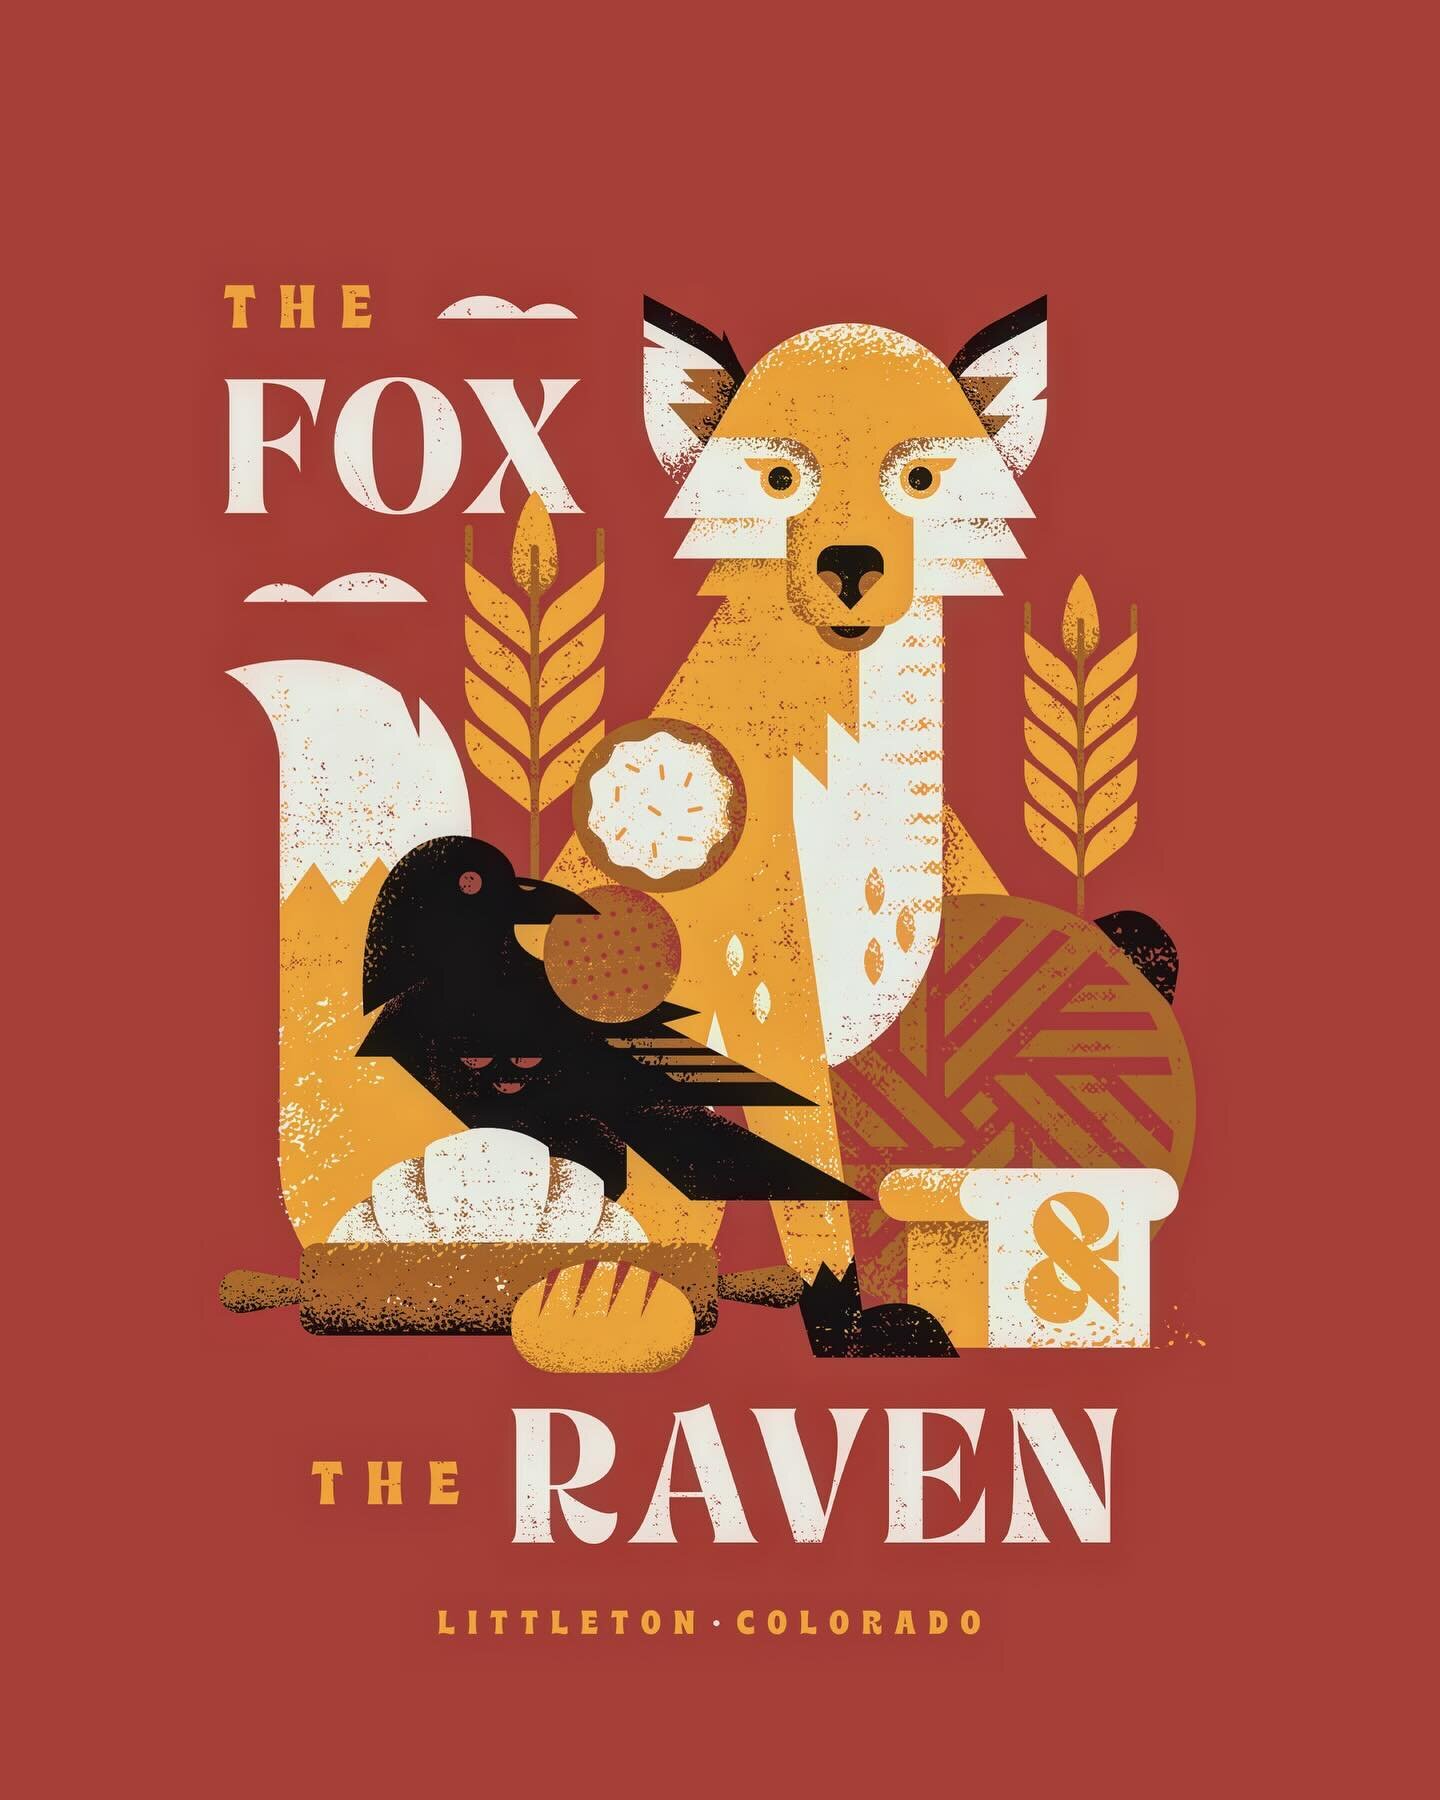 New work: an illustration for The Fox &amp; the Raven Mill &amp; Bakery in Littleton, Colorado. 🦊🍞 I believe this design will finds its way onto t-shirts and tote bags, bringing a touch of artistry to everyday essentials. A collaboration with my pa